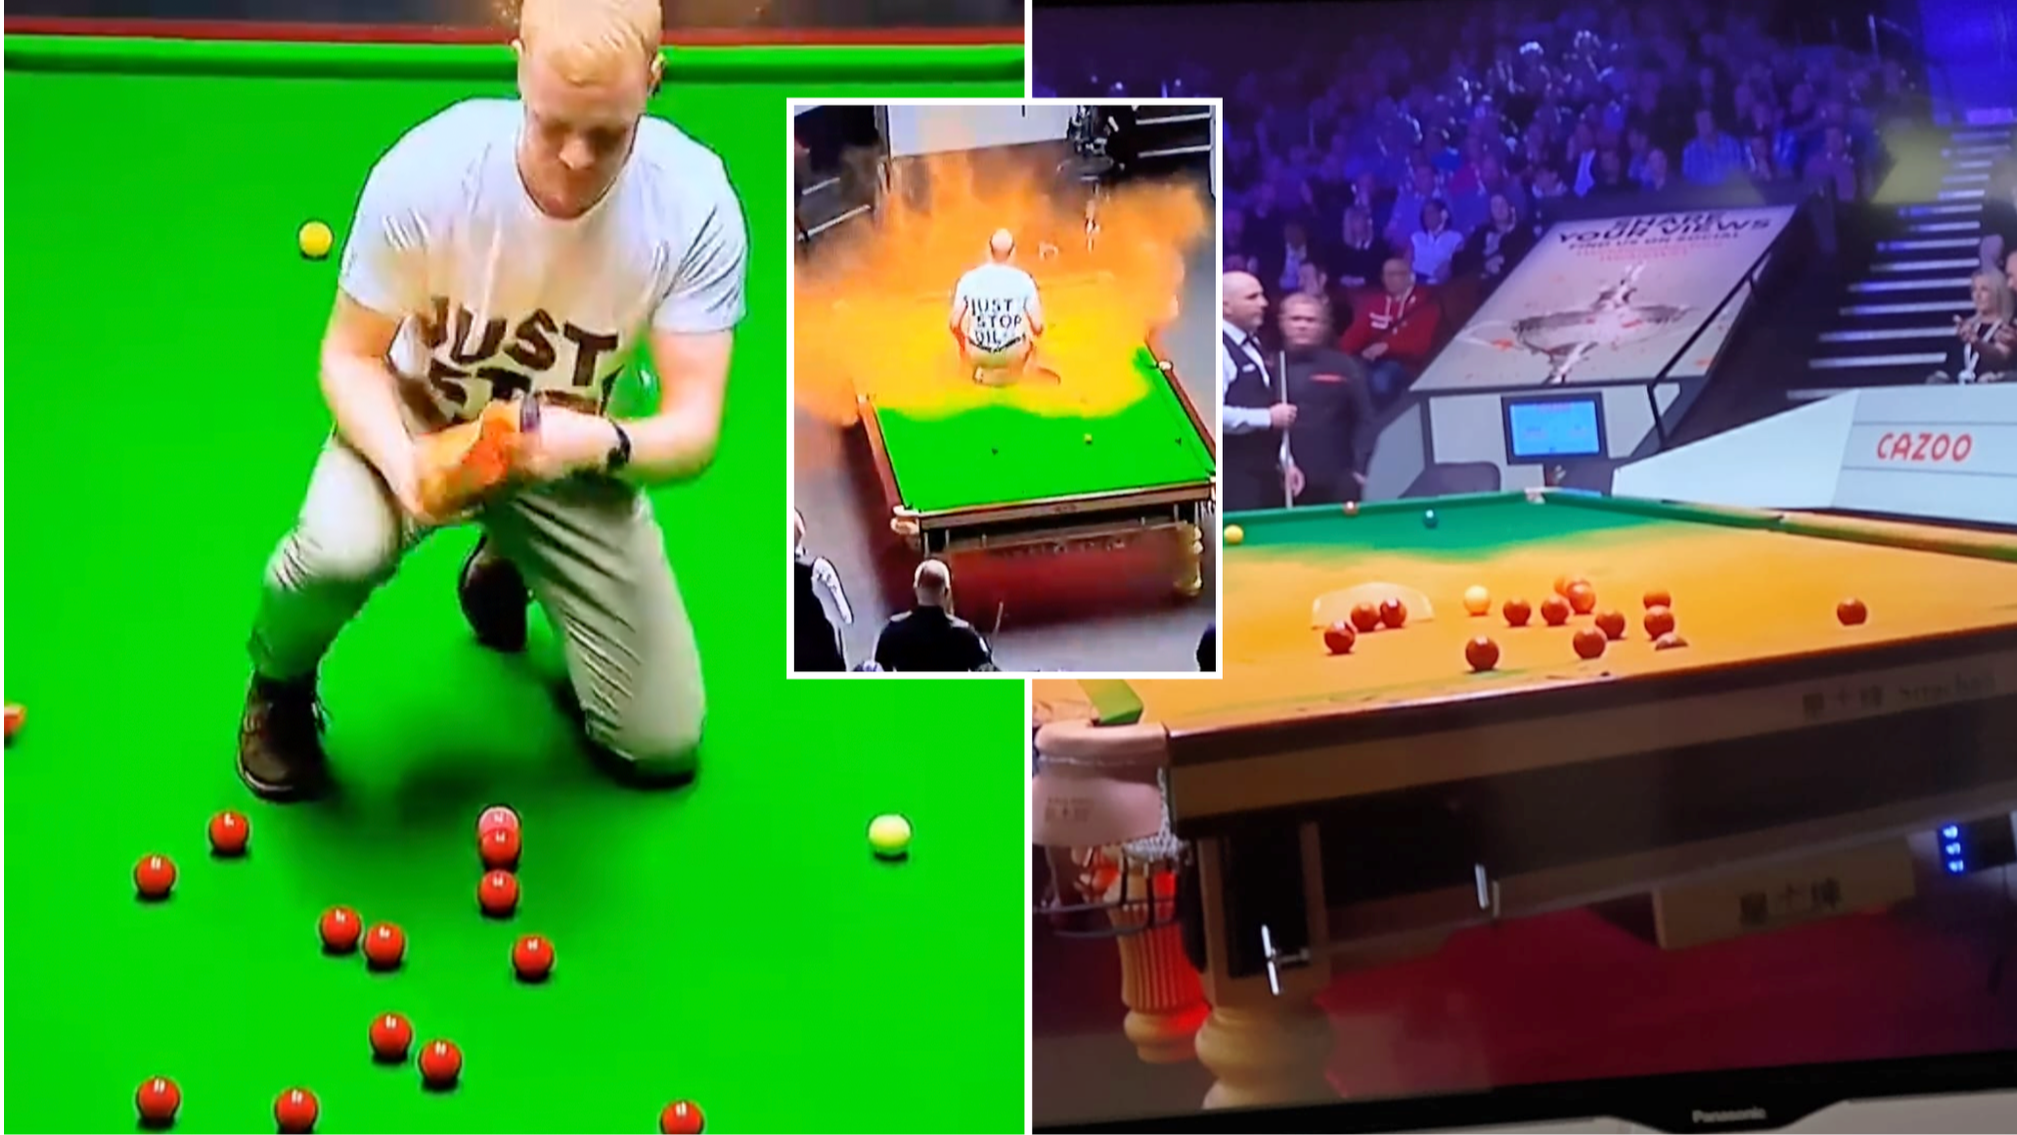 Just Stop Oil protest at World Snooker Championship sees orange powder cover table at Crucible